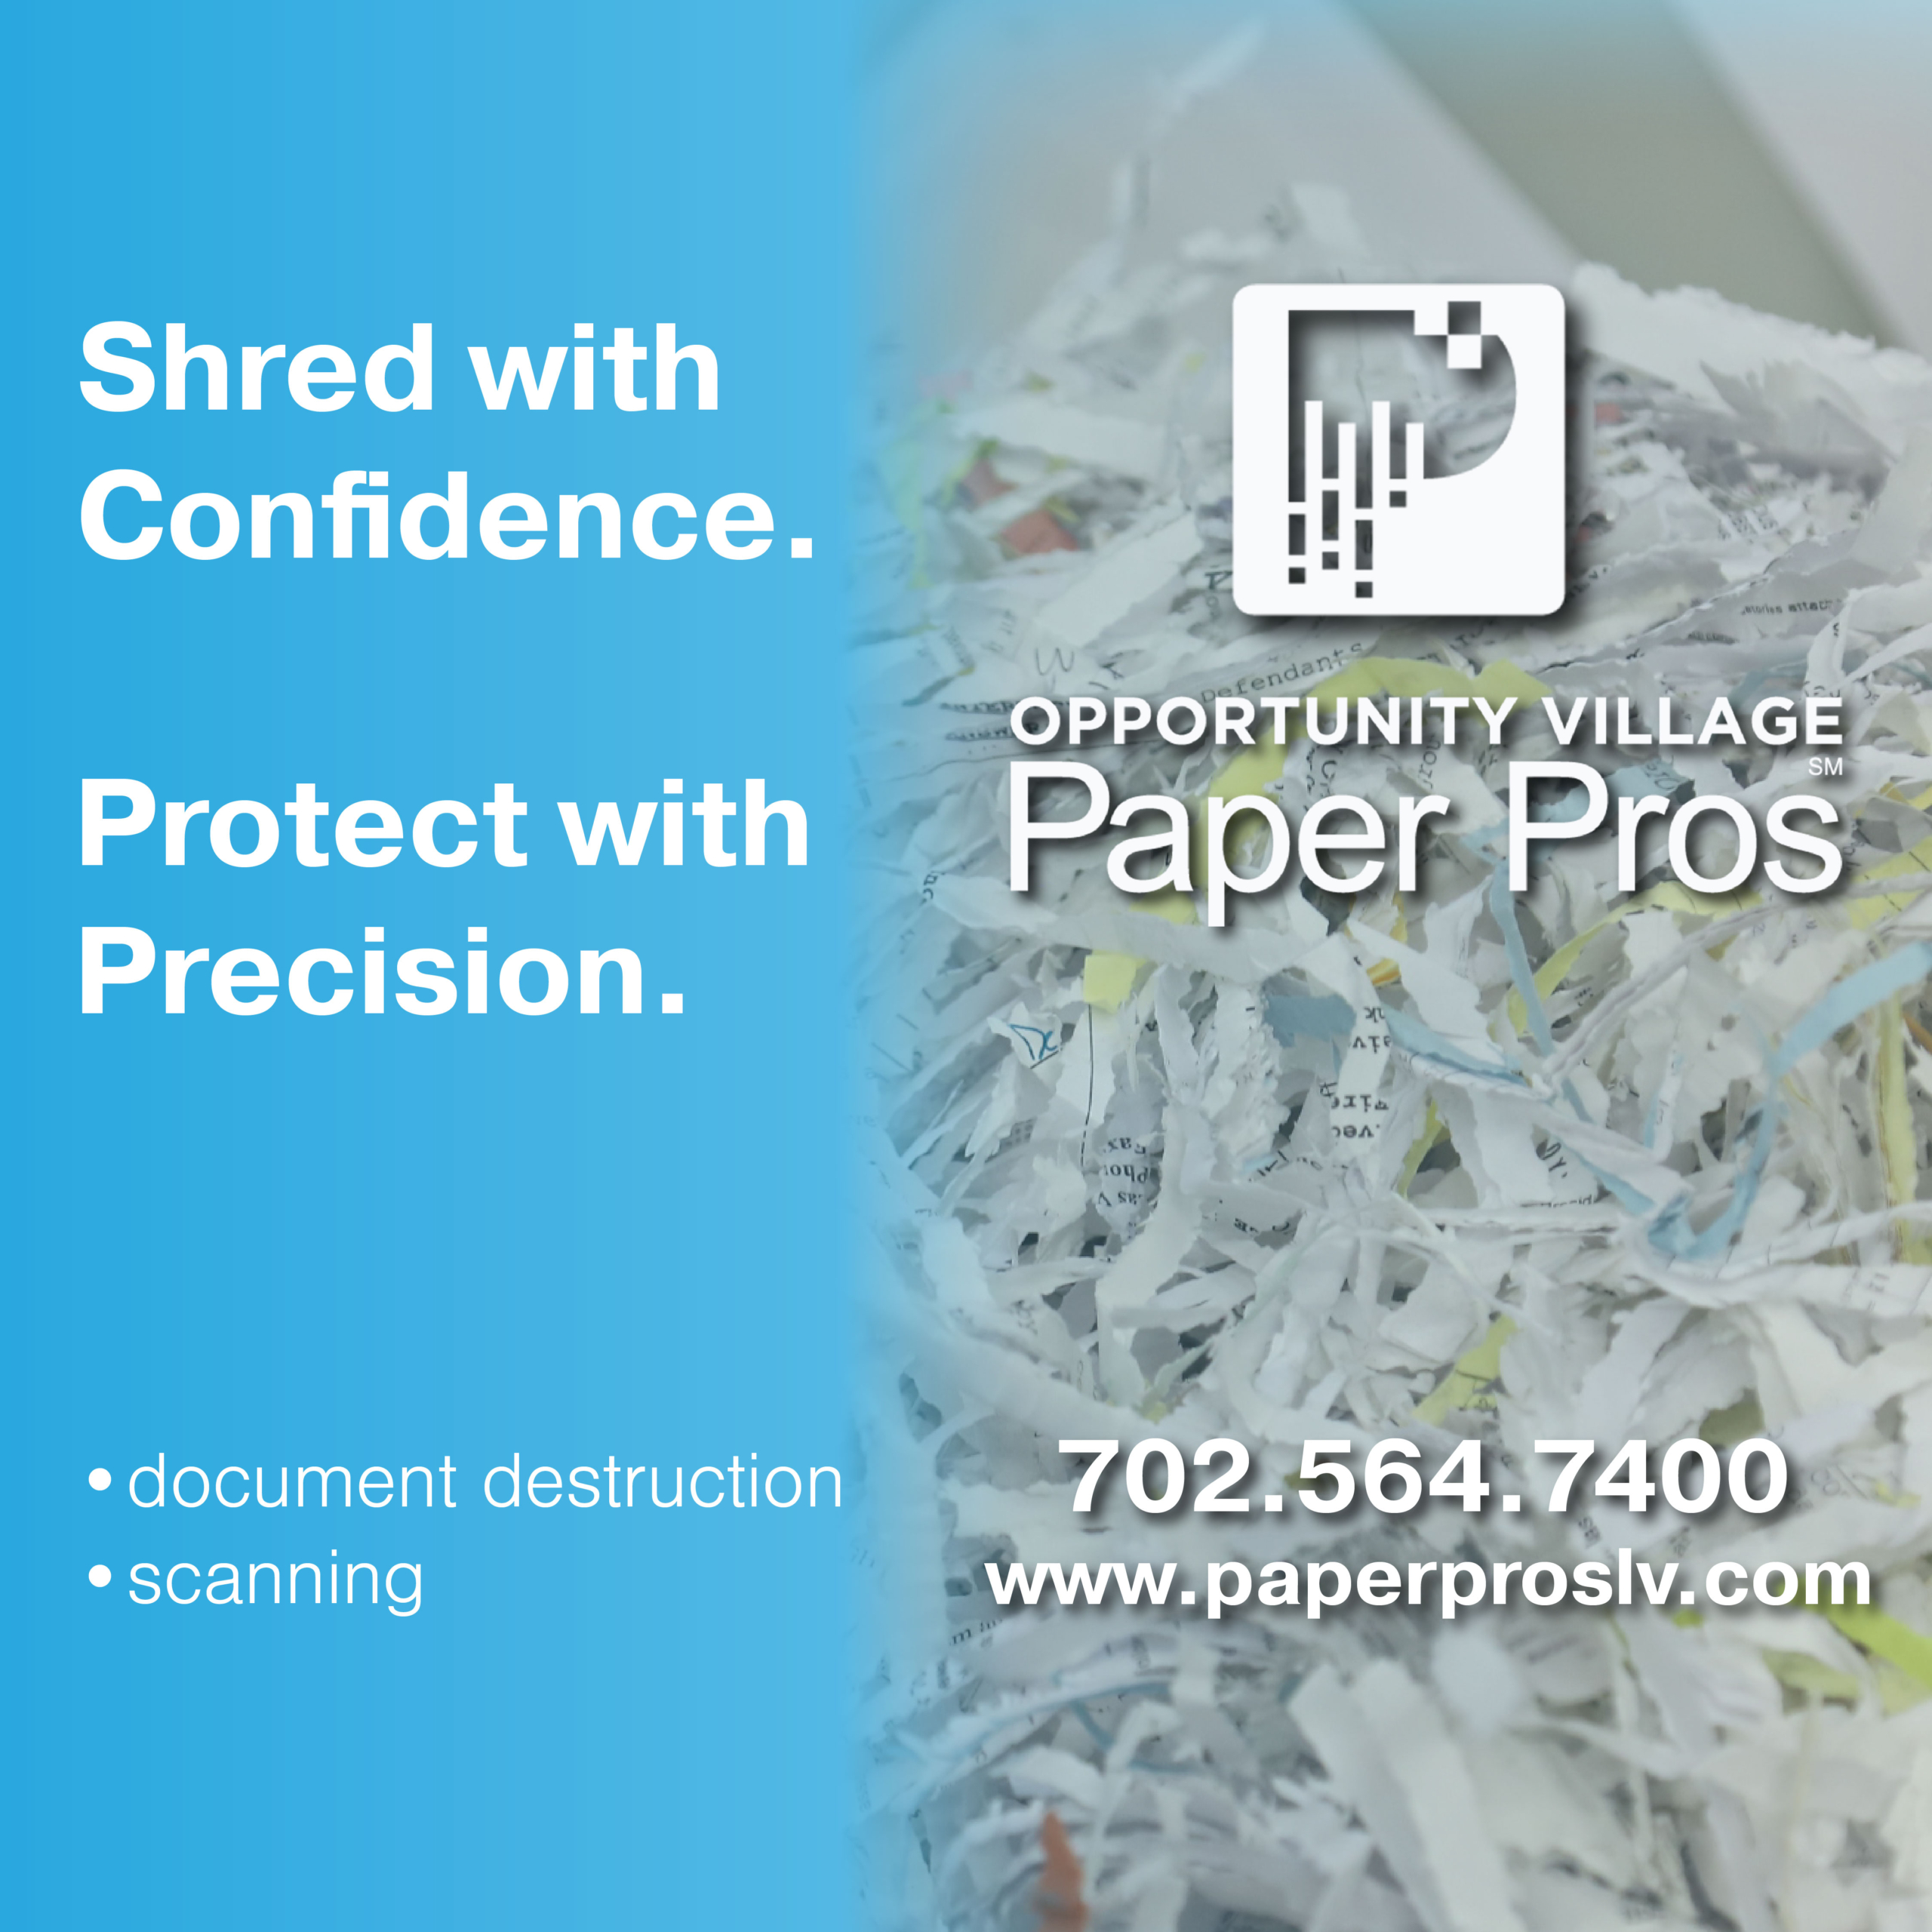 image of shredded paper with the text 'shred with confidence. protect with precision. opportunity village paper pros. document destruction. scanning. 702.564.7400. www.paperproslv.com